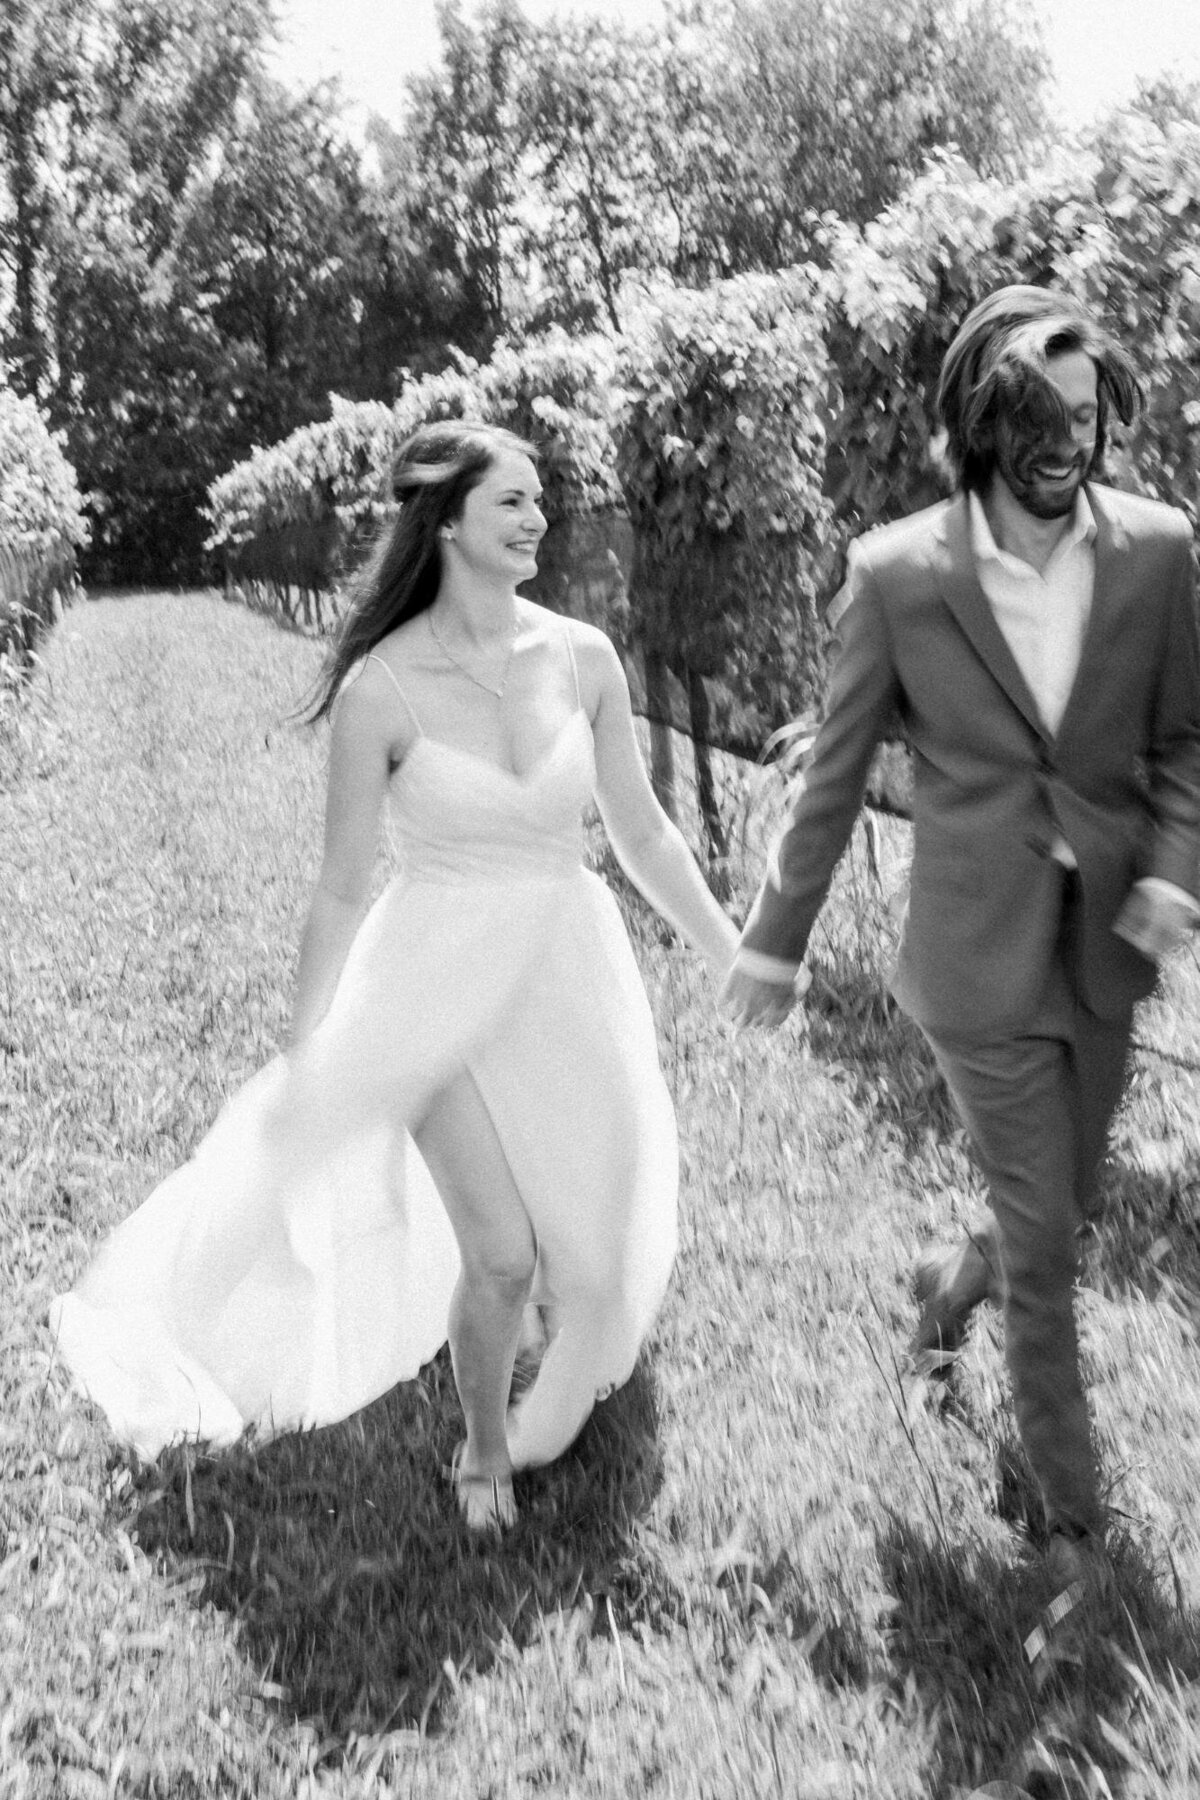 A black and white photo of a bride in a flowing dress and a groom in a suit, holding hands and walking through a grassy area with a sense of joy.